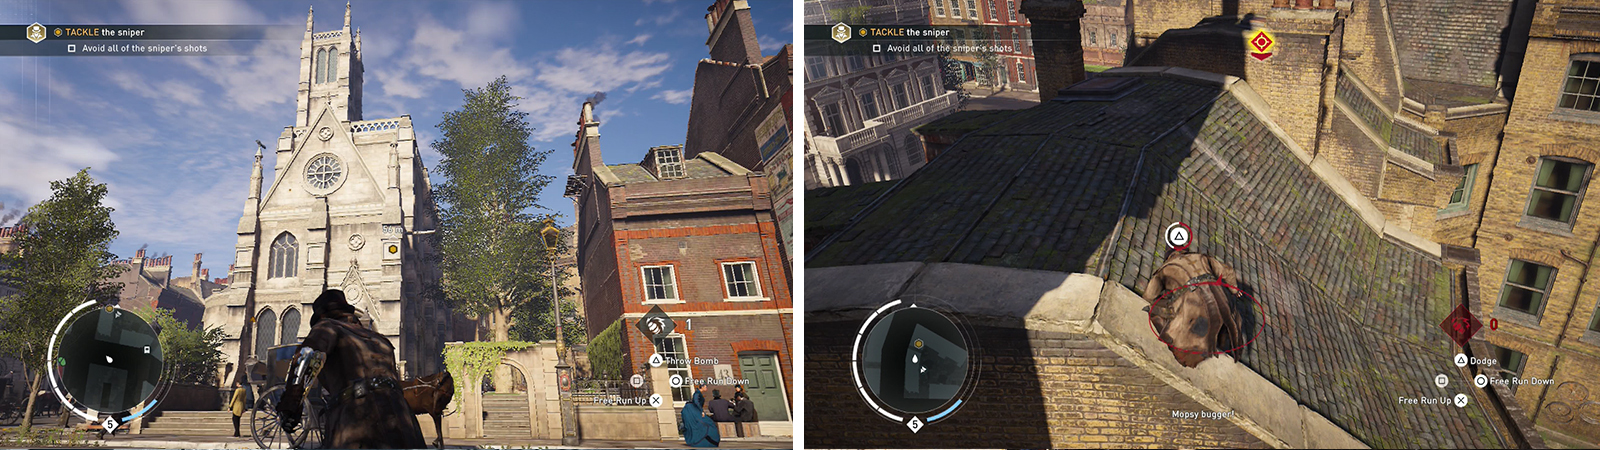 Climb to the nearby rooftop (left) to chase the Sniper. Be sure to hit the button prompt to avoid the shots (right) during the chase.